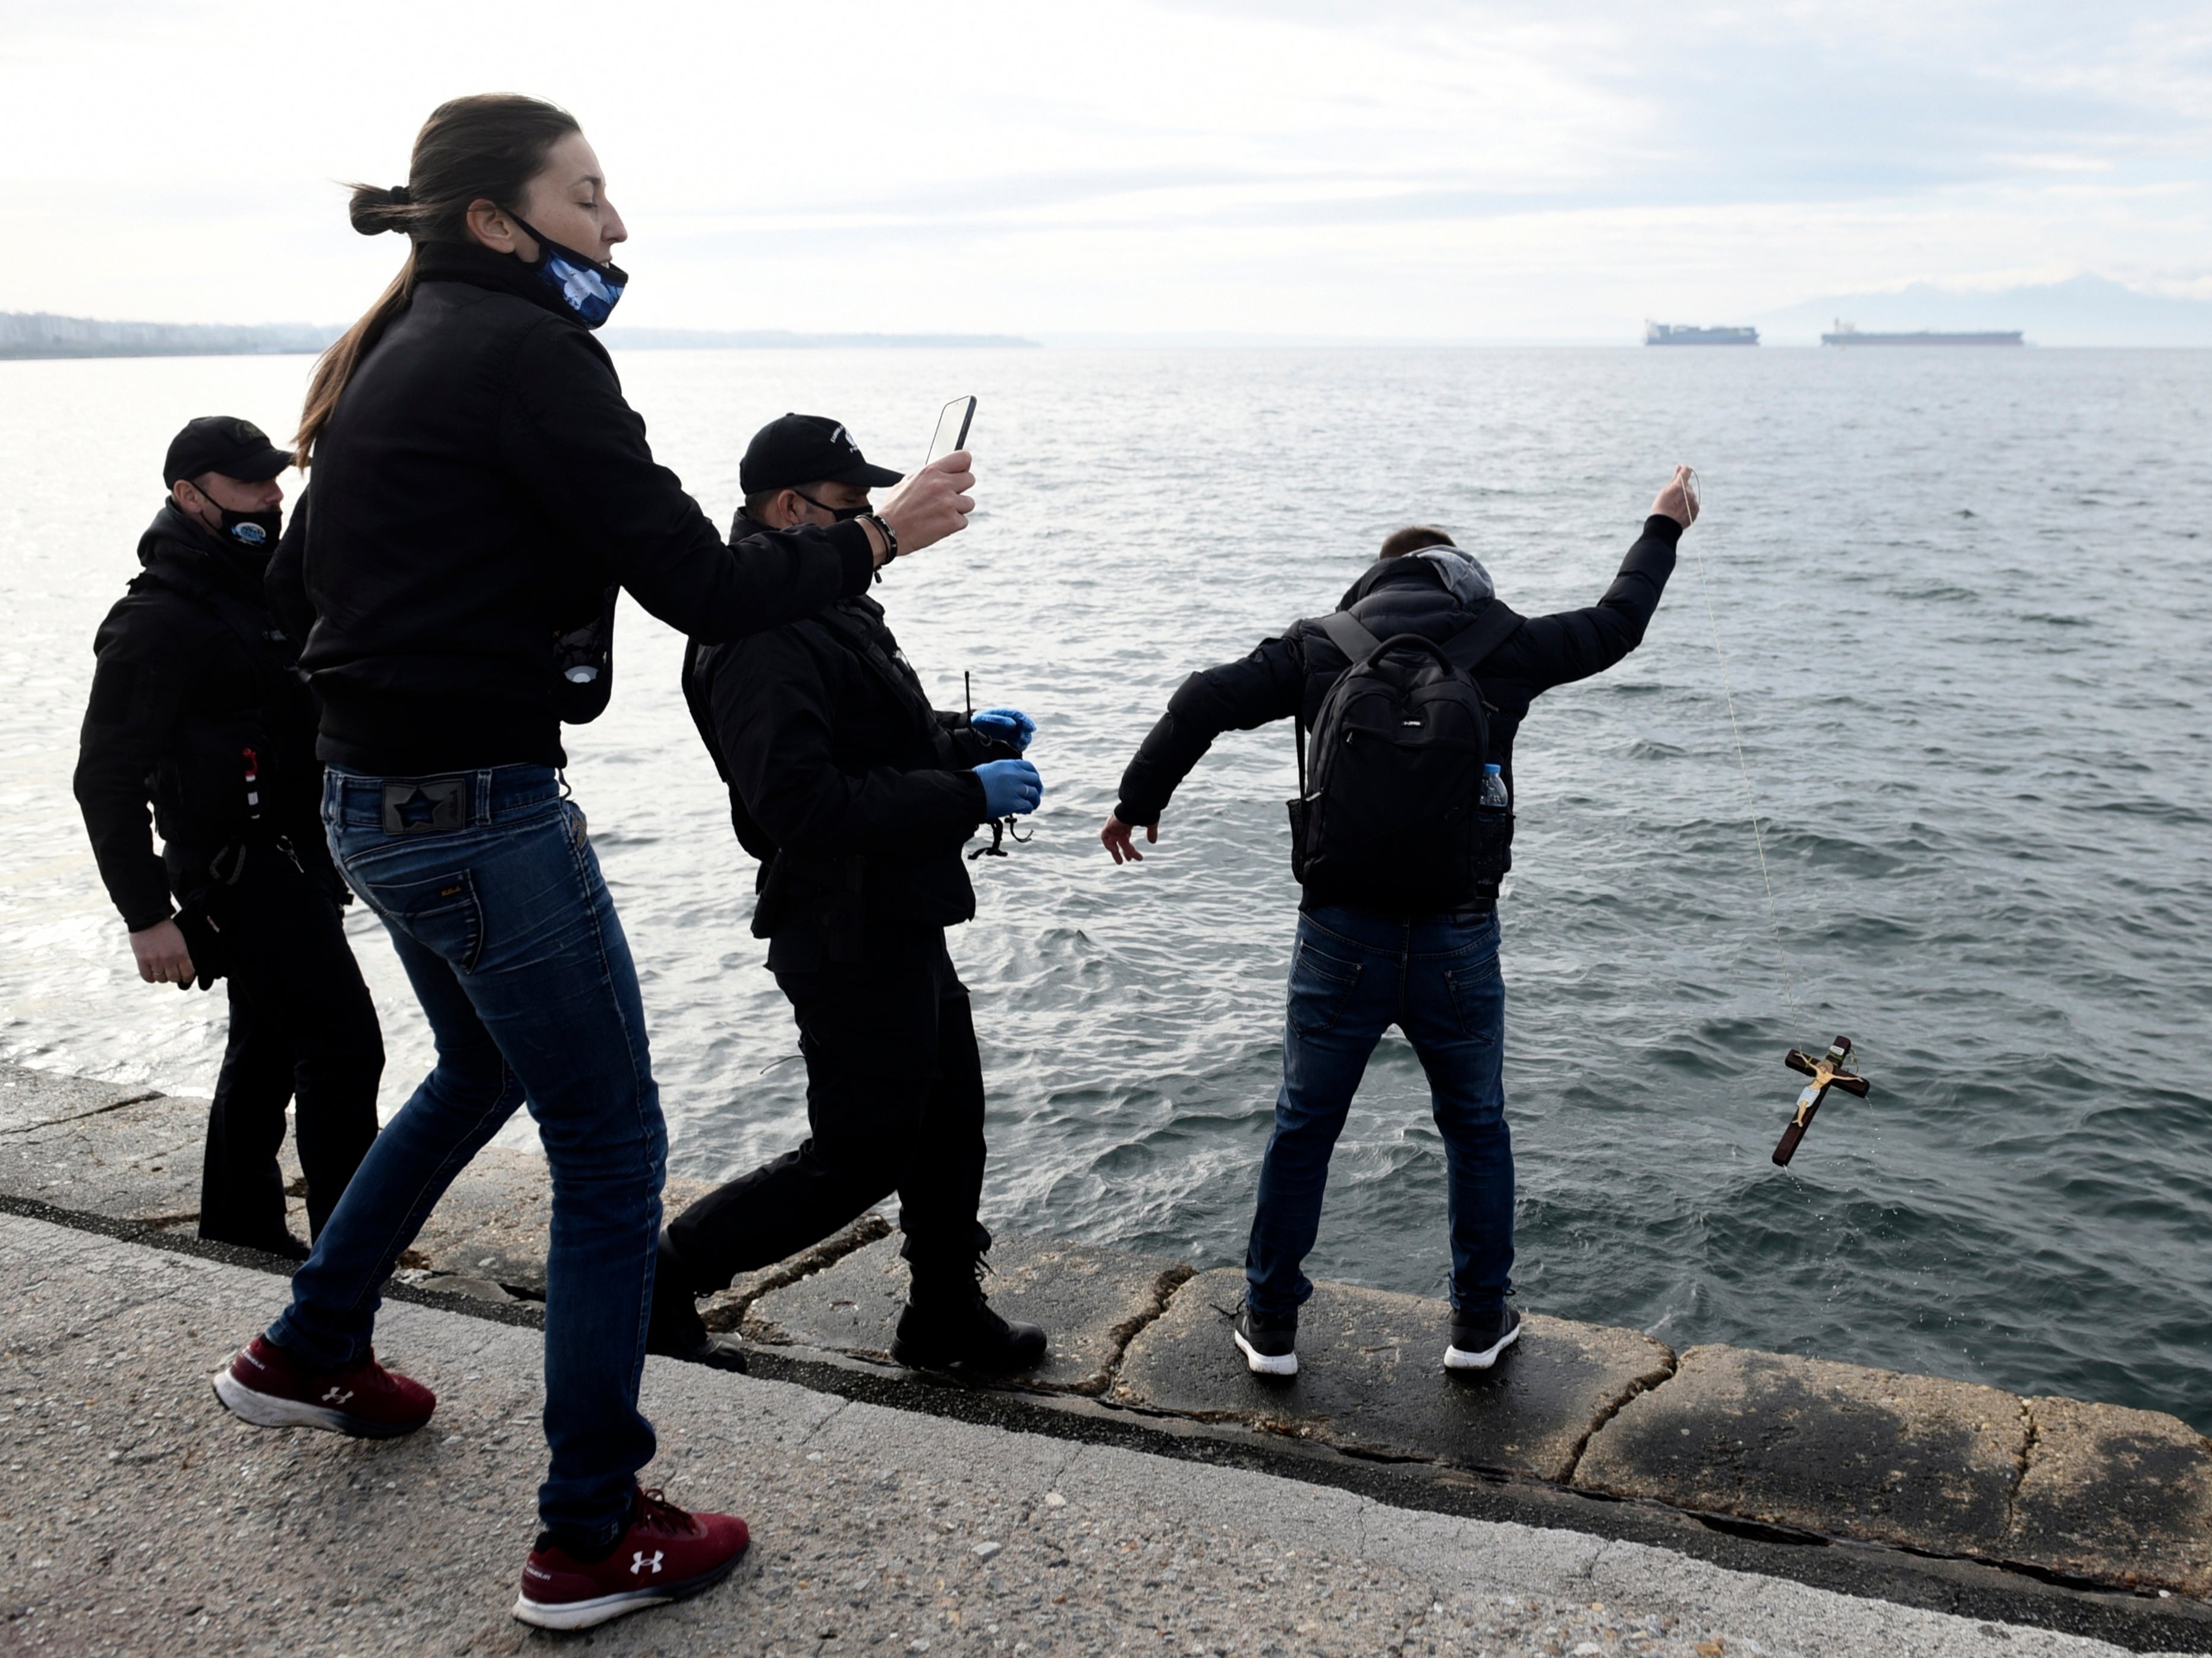 A man throws a cross into the sea as policemen go to detain him during Epiphany in the northern city of Thessaloniki